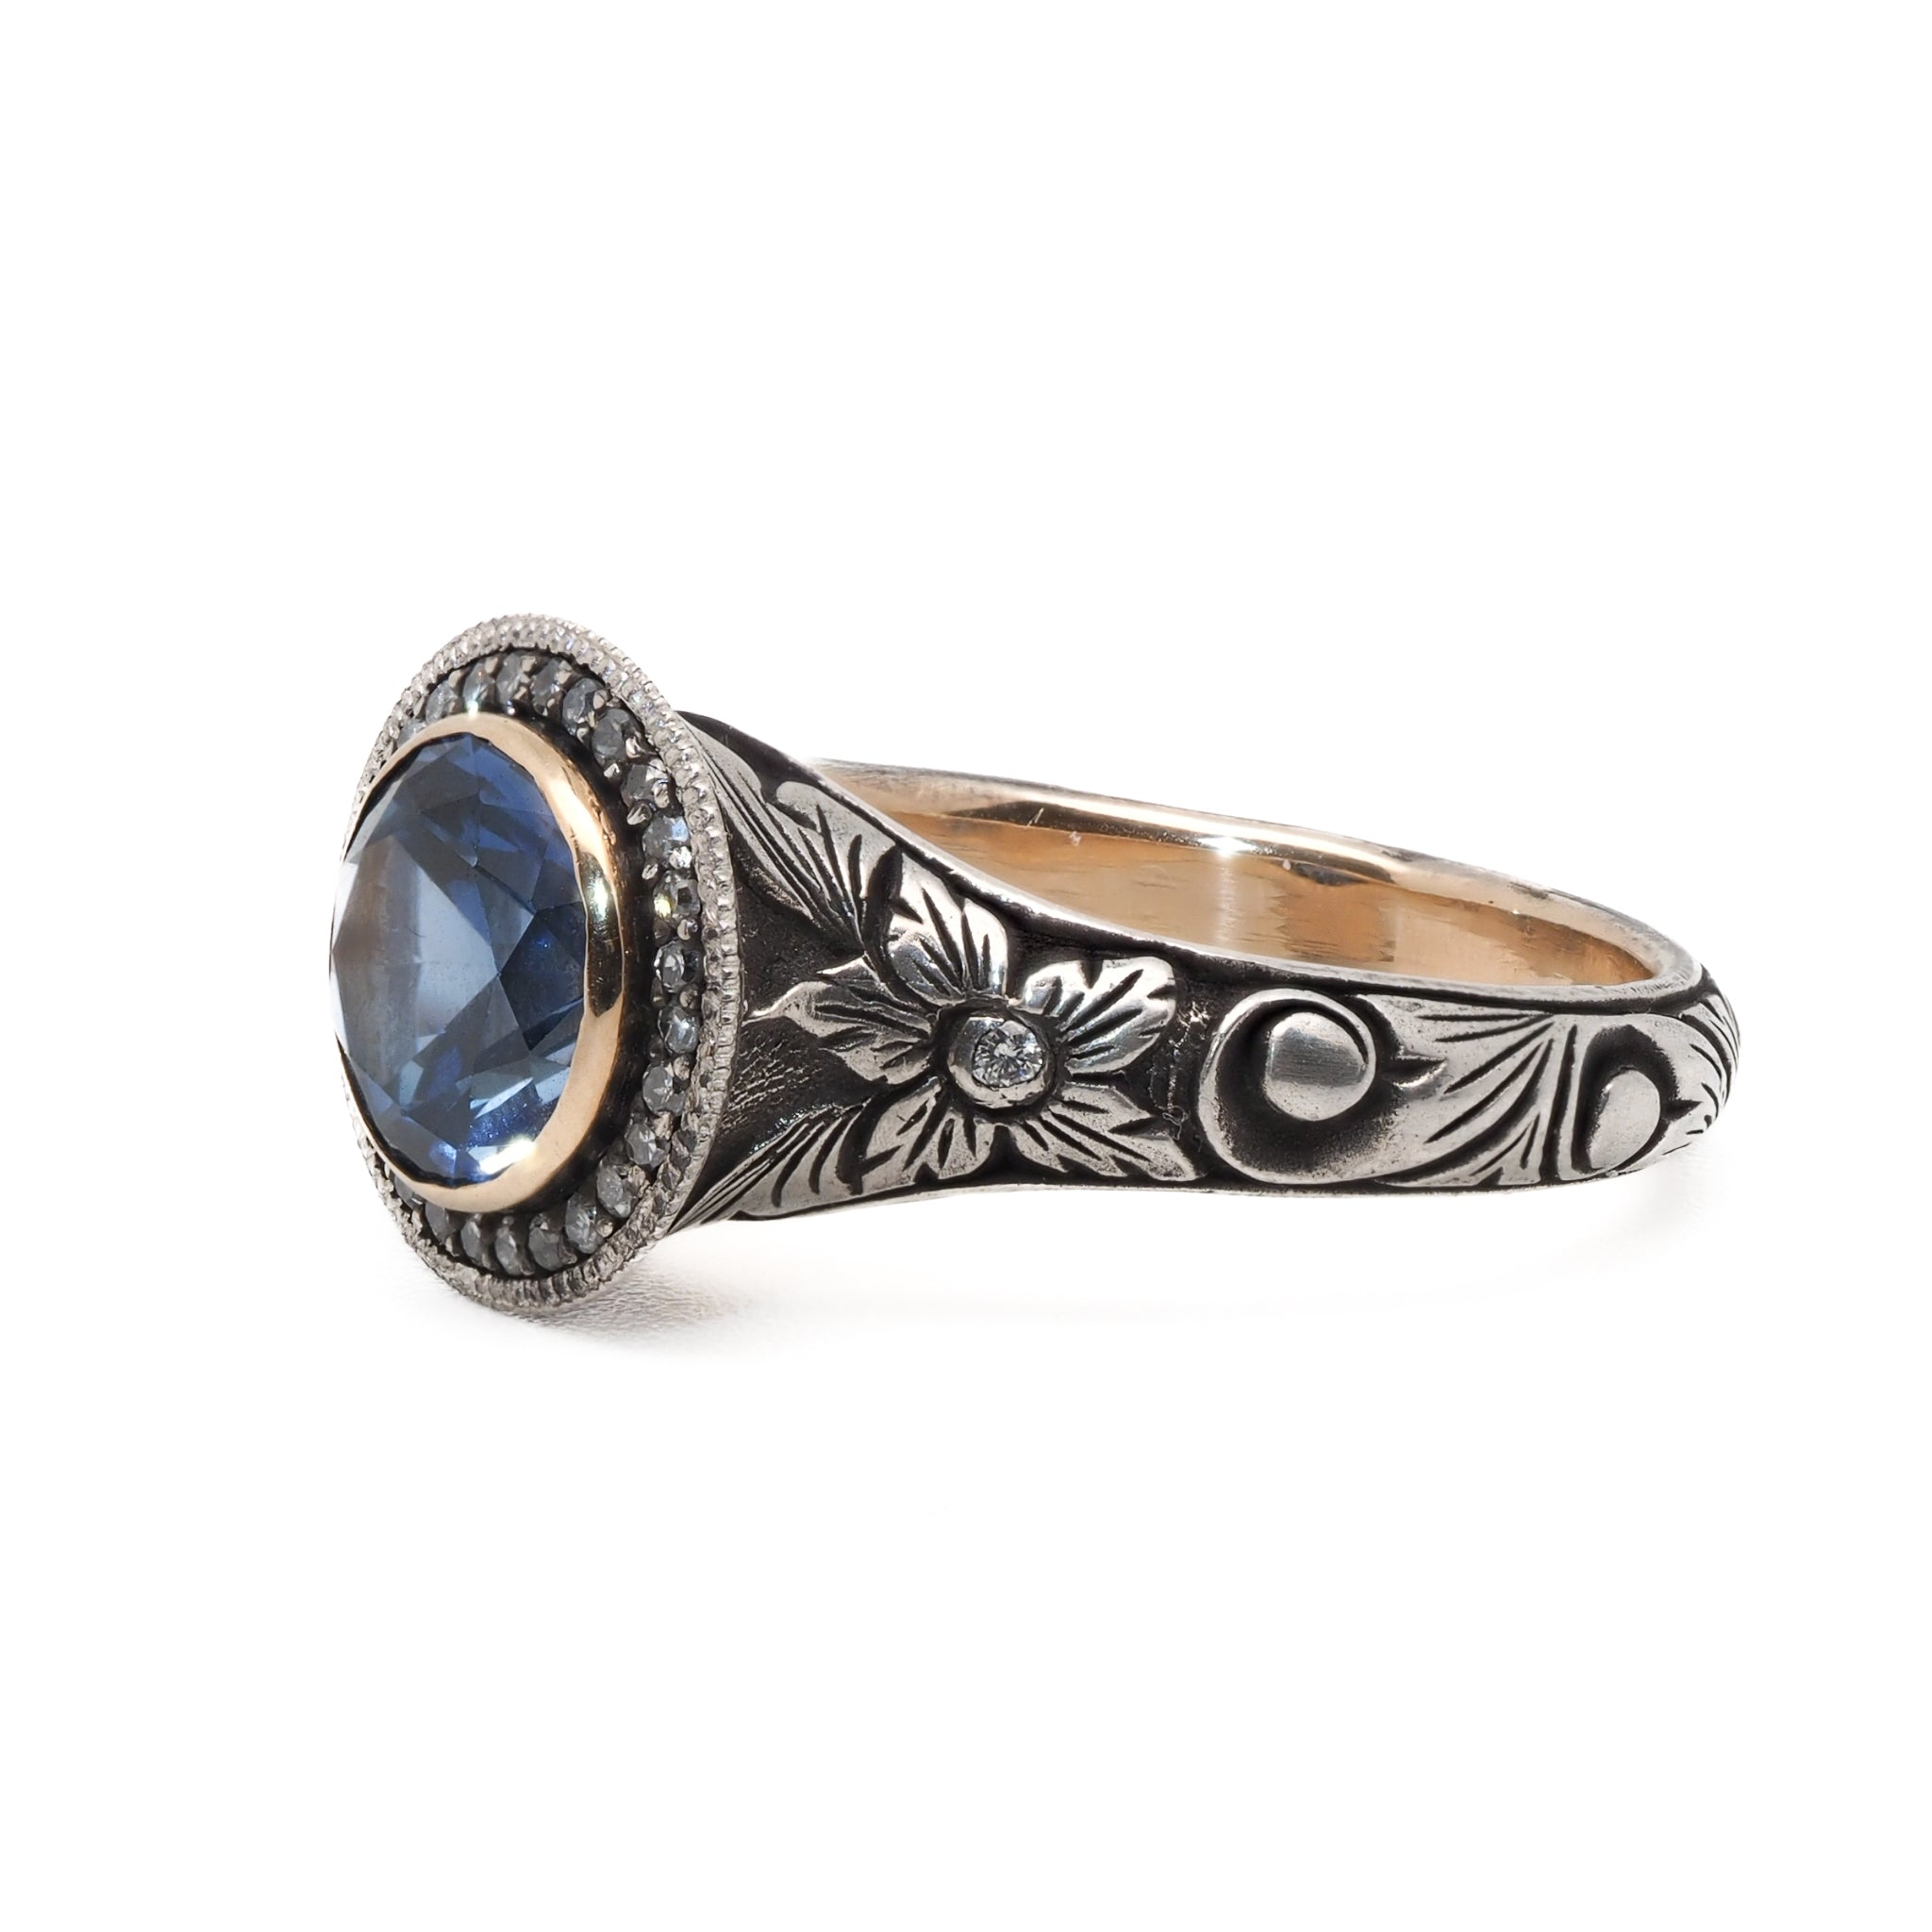 Ebru Jewelry Luxury Series - Exquisite Sapphire Engagement Ring for a timeless and elegant look.